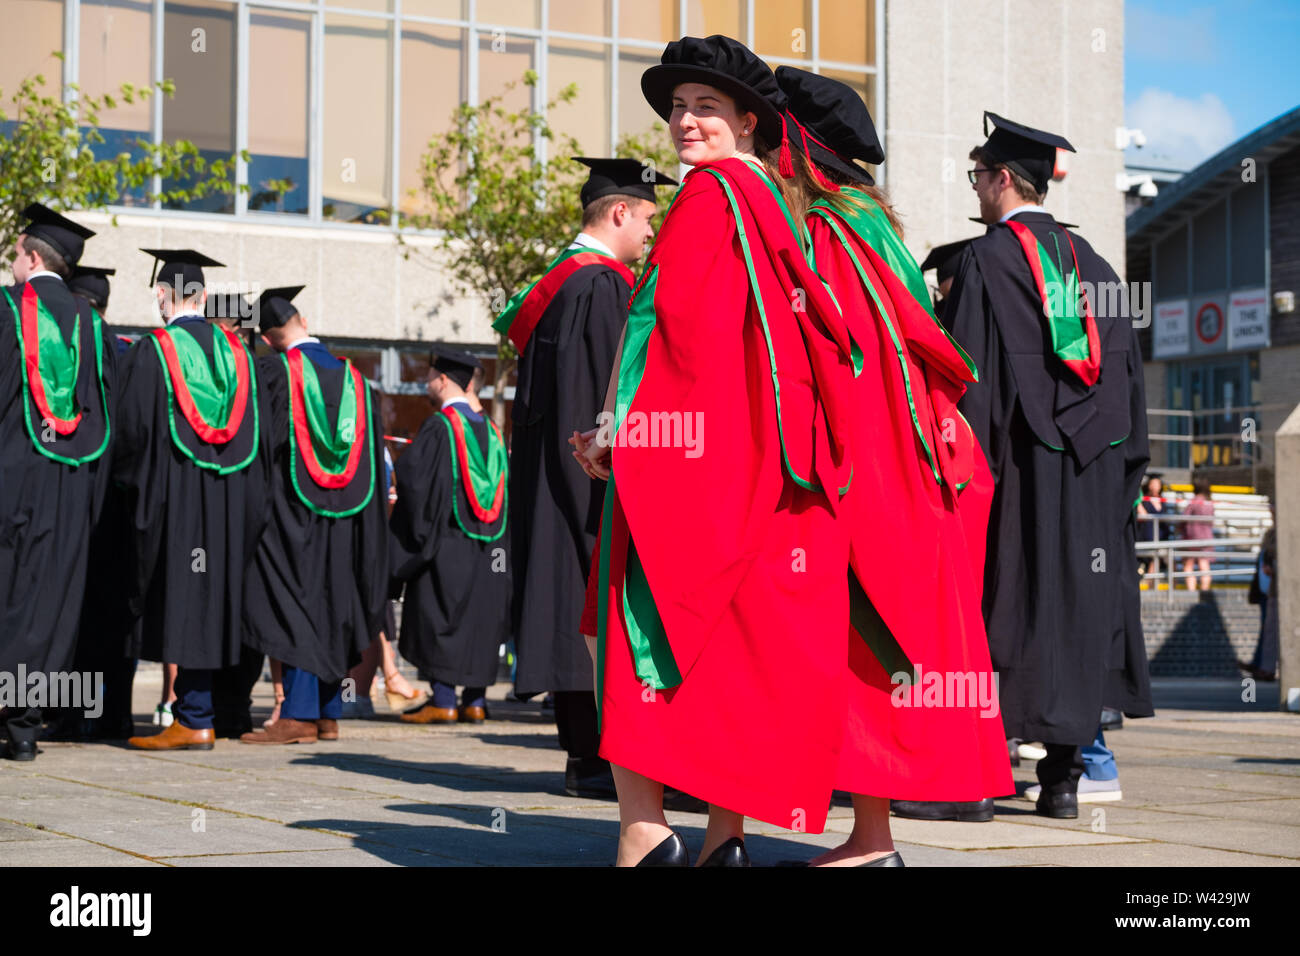 Higher education in the UK - two women successful PhD doctoral students at the graduation ceremony at Aberystwyth university, after receiving their degrees,  wearing their traditional tudor style bonnet caps and  red coloured  gowns. July 2019 Stock Photo